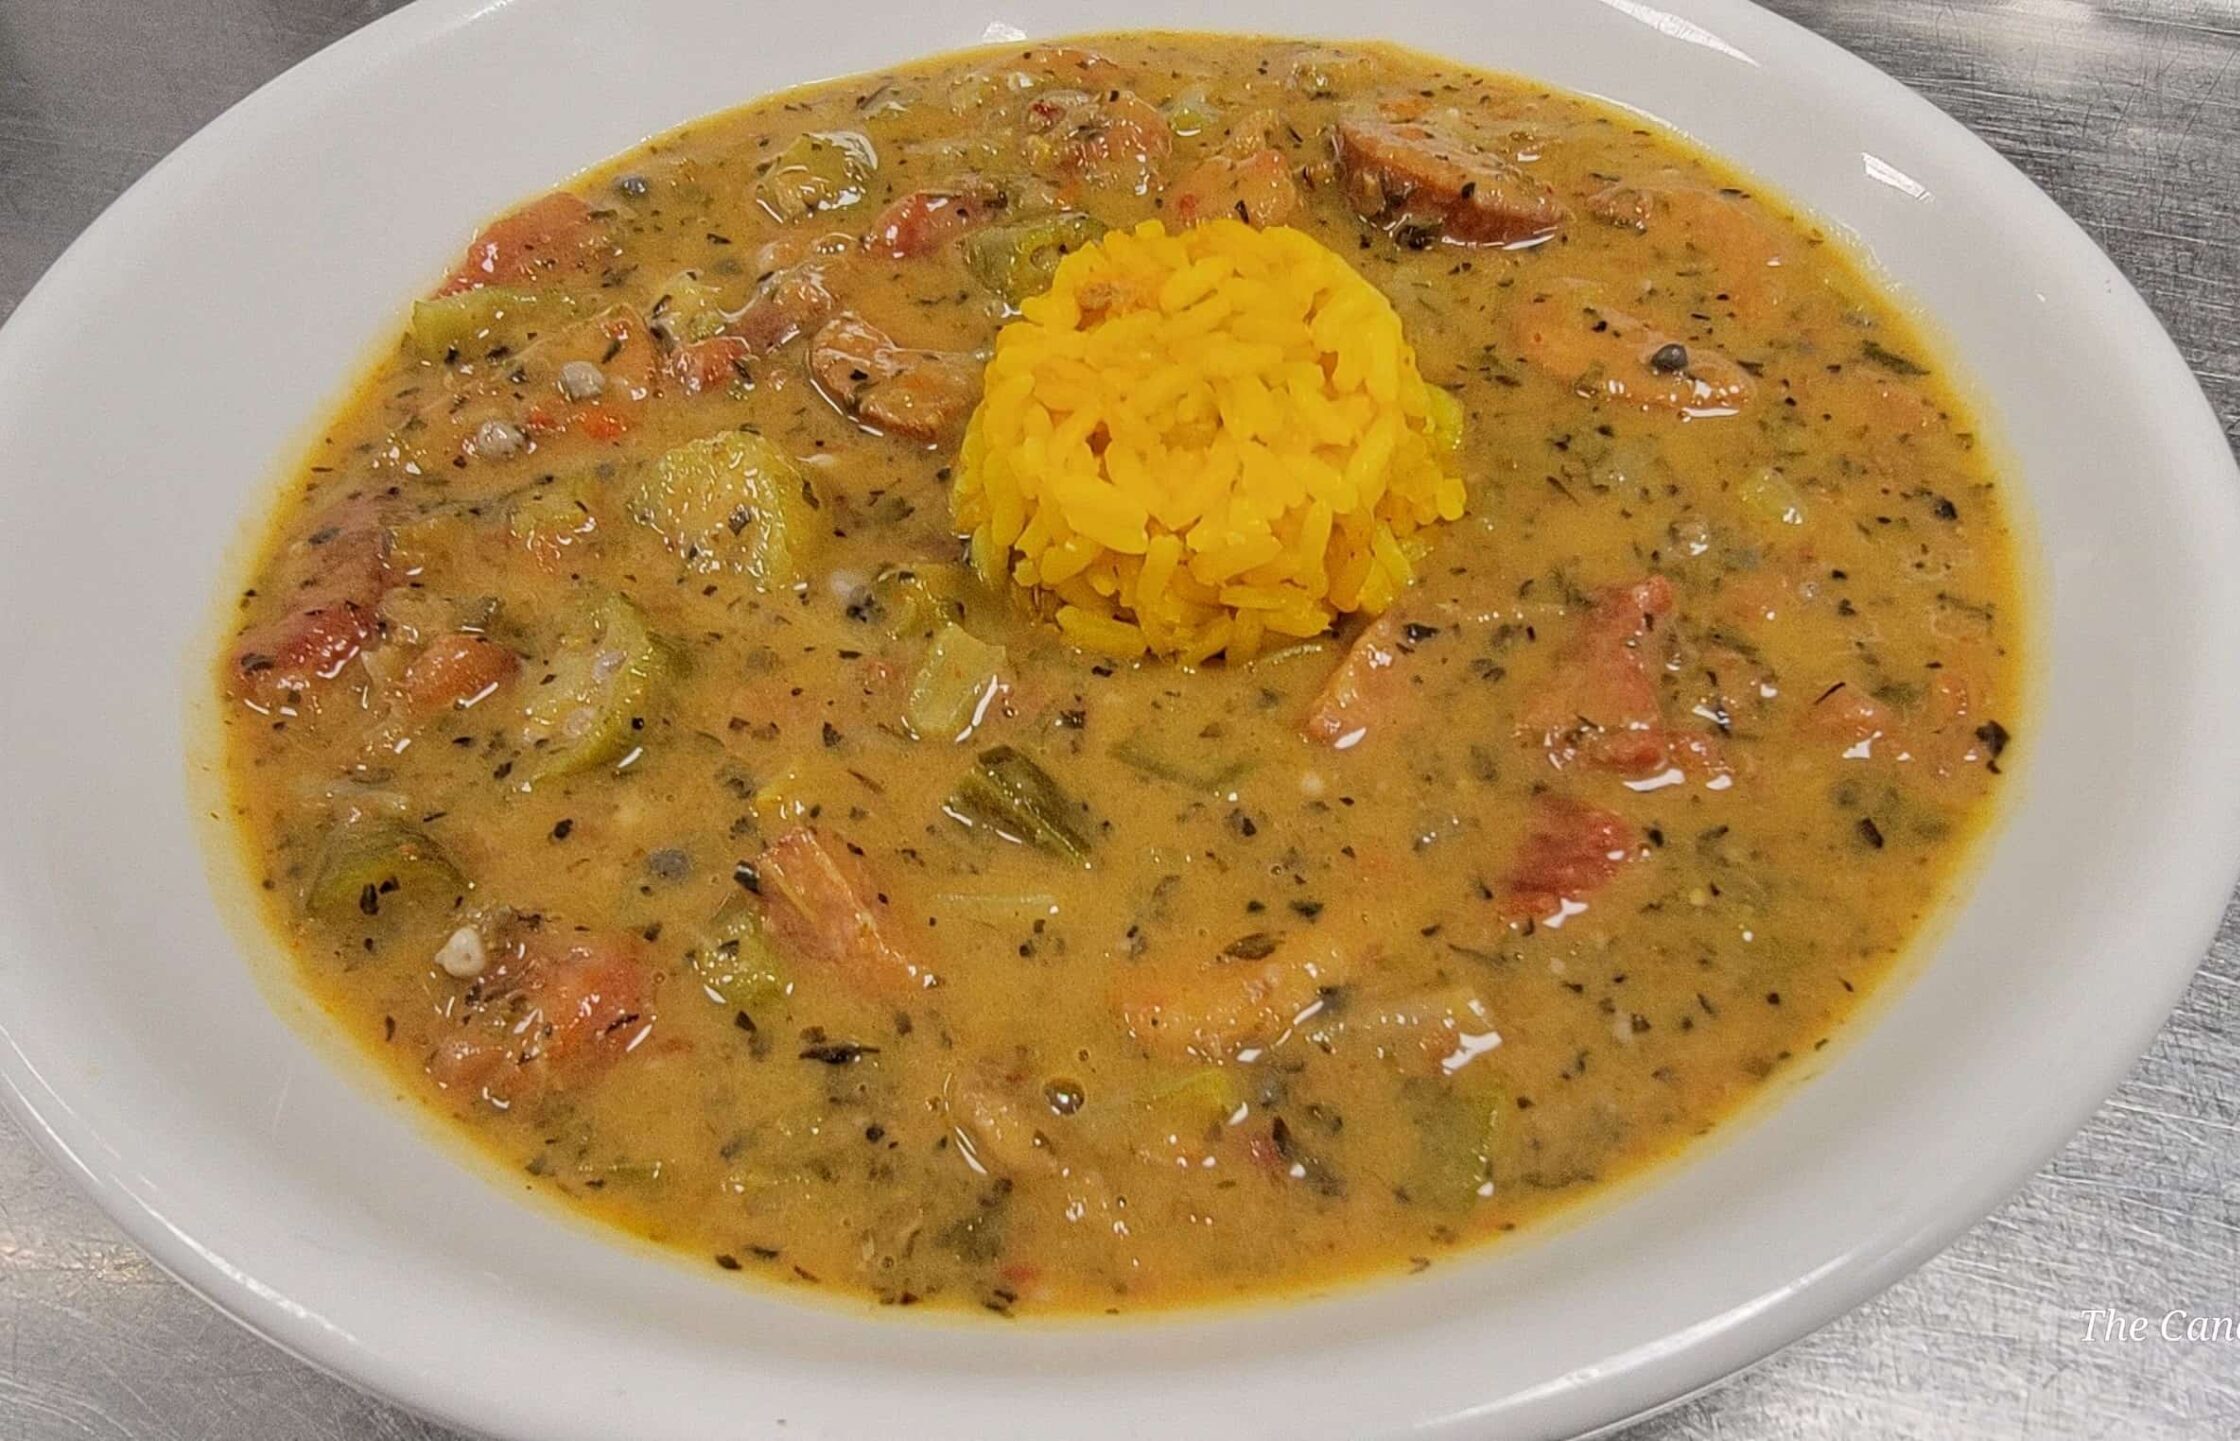 Seafood Gumbo soup at The Canopy Lounge